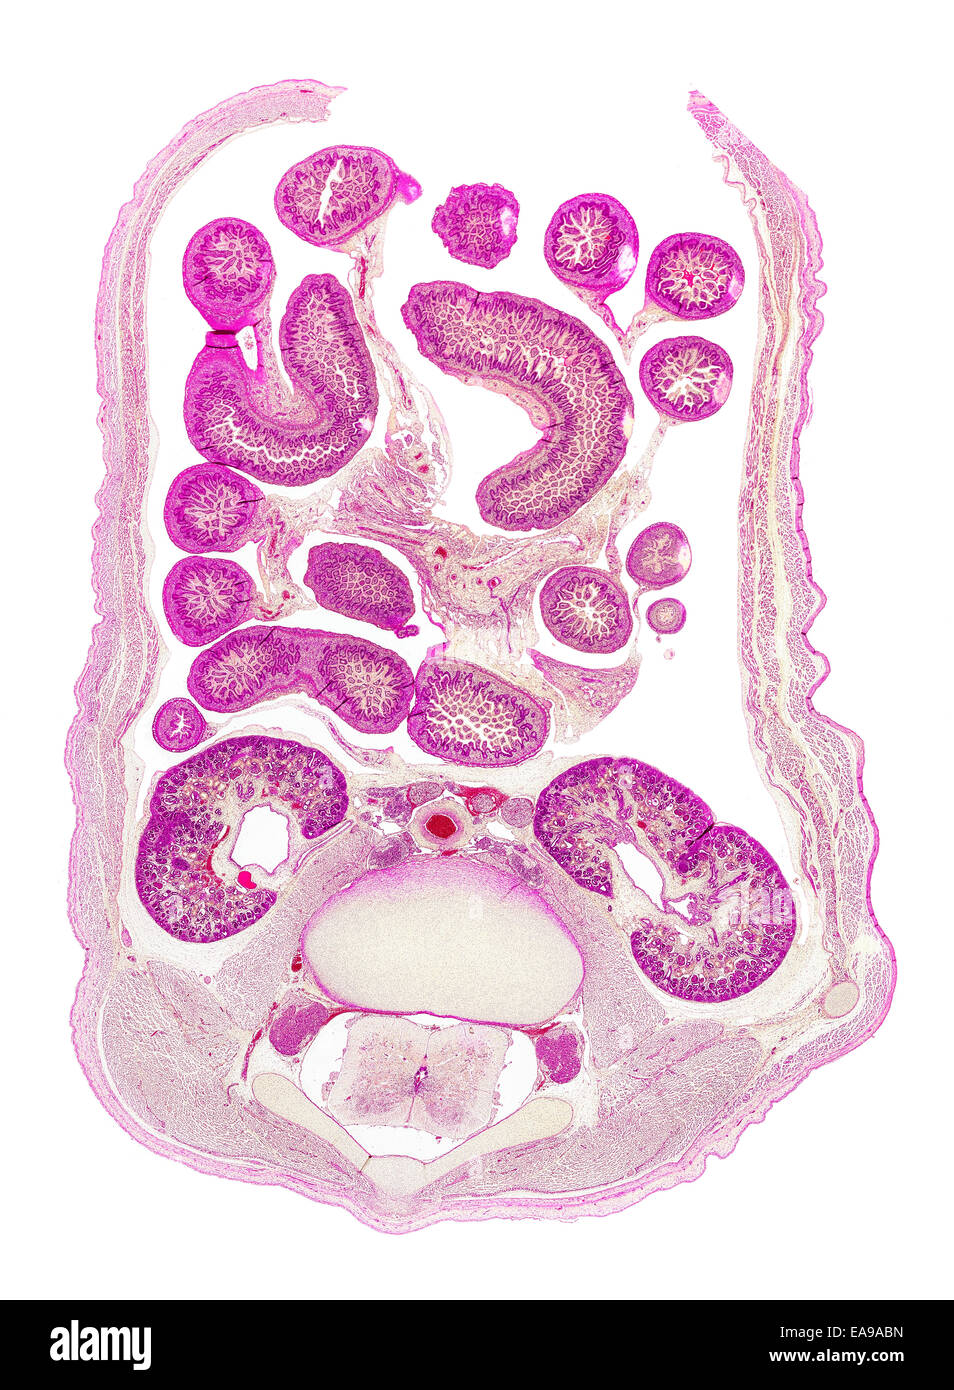 Human fetus abdomen stained section showing general structures Stock Photo